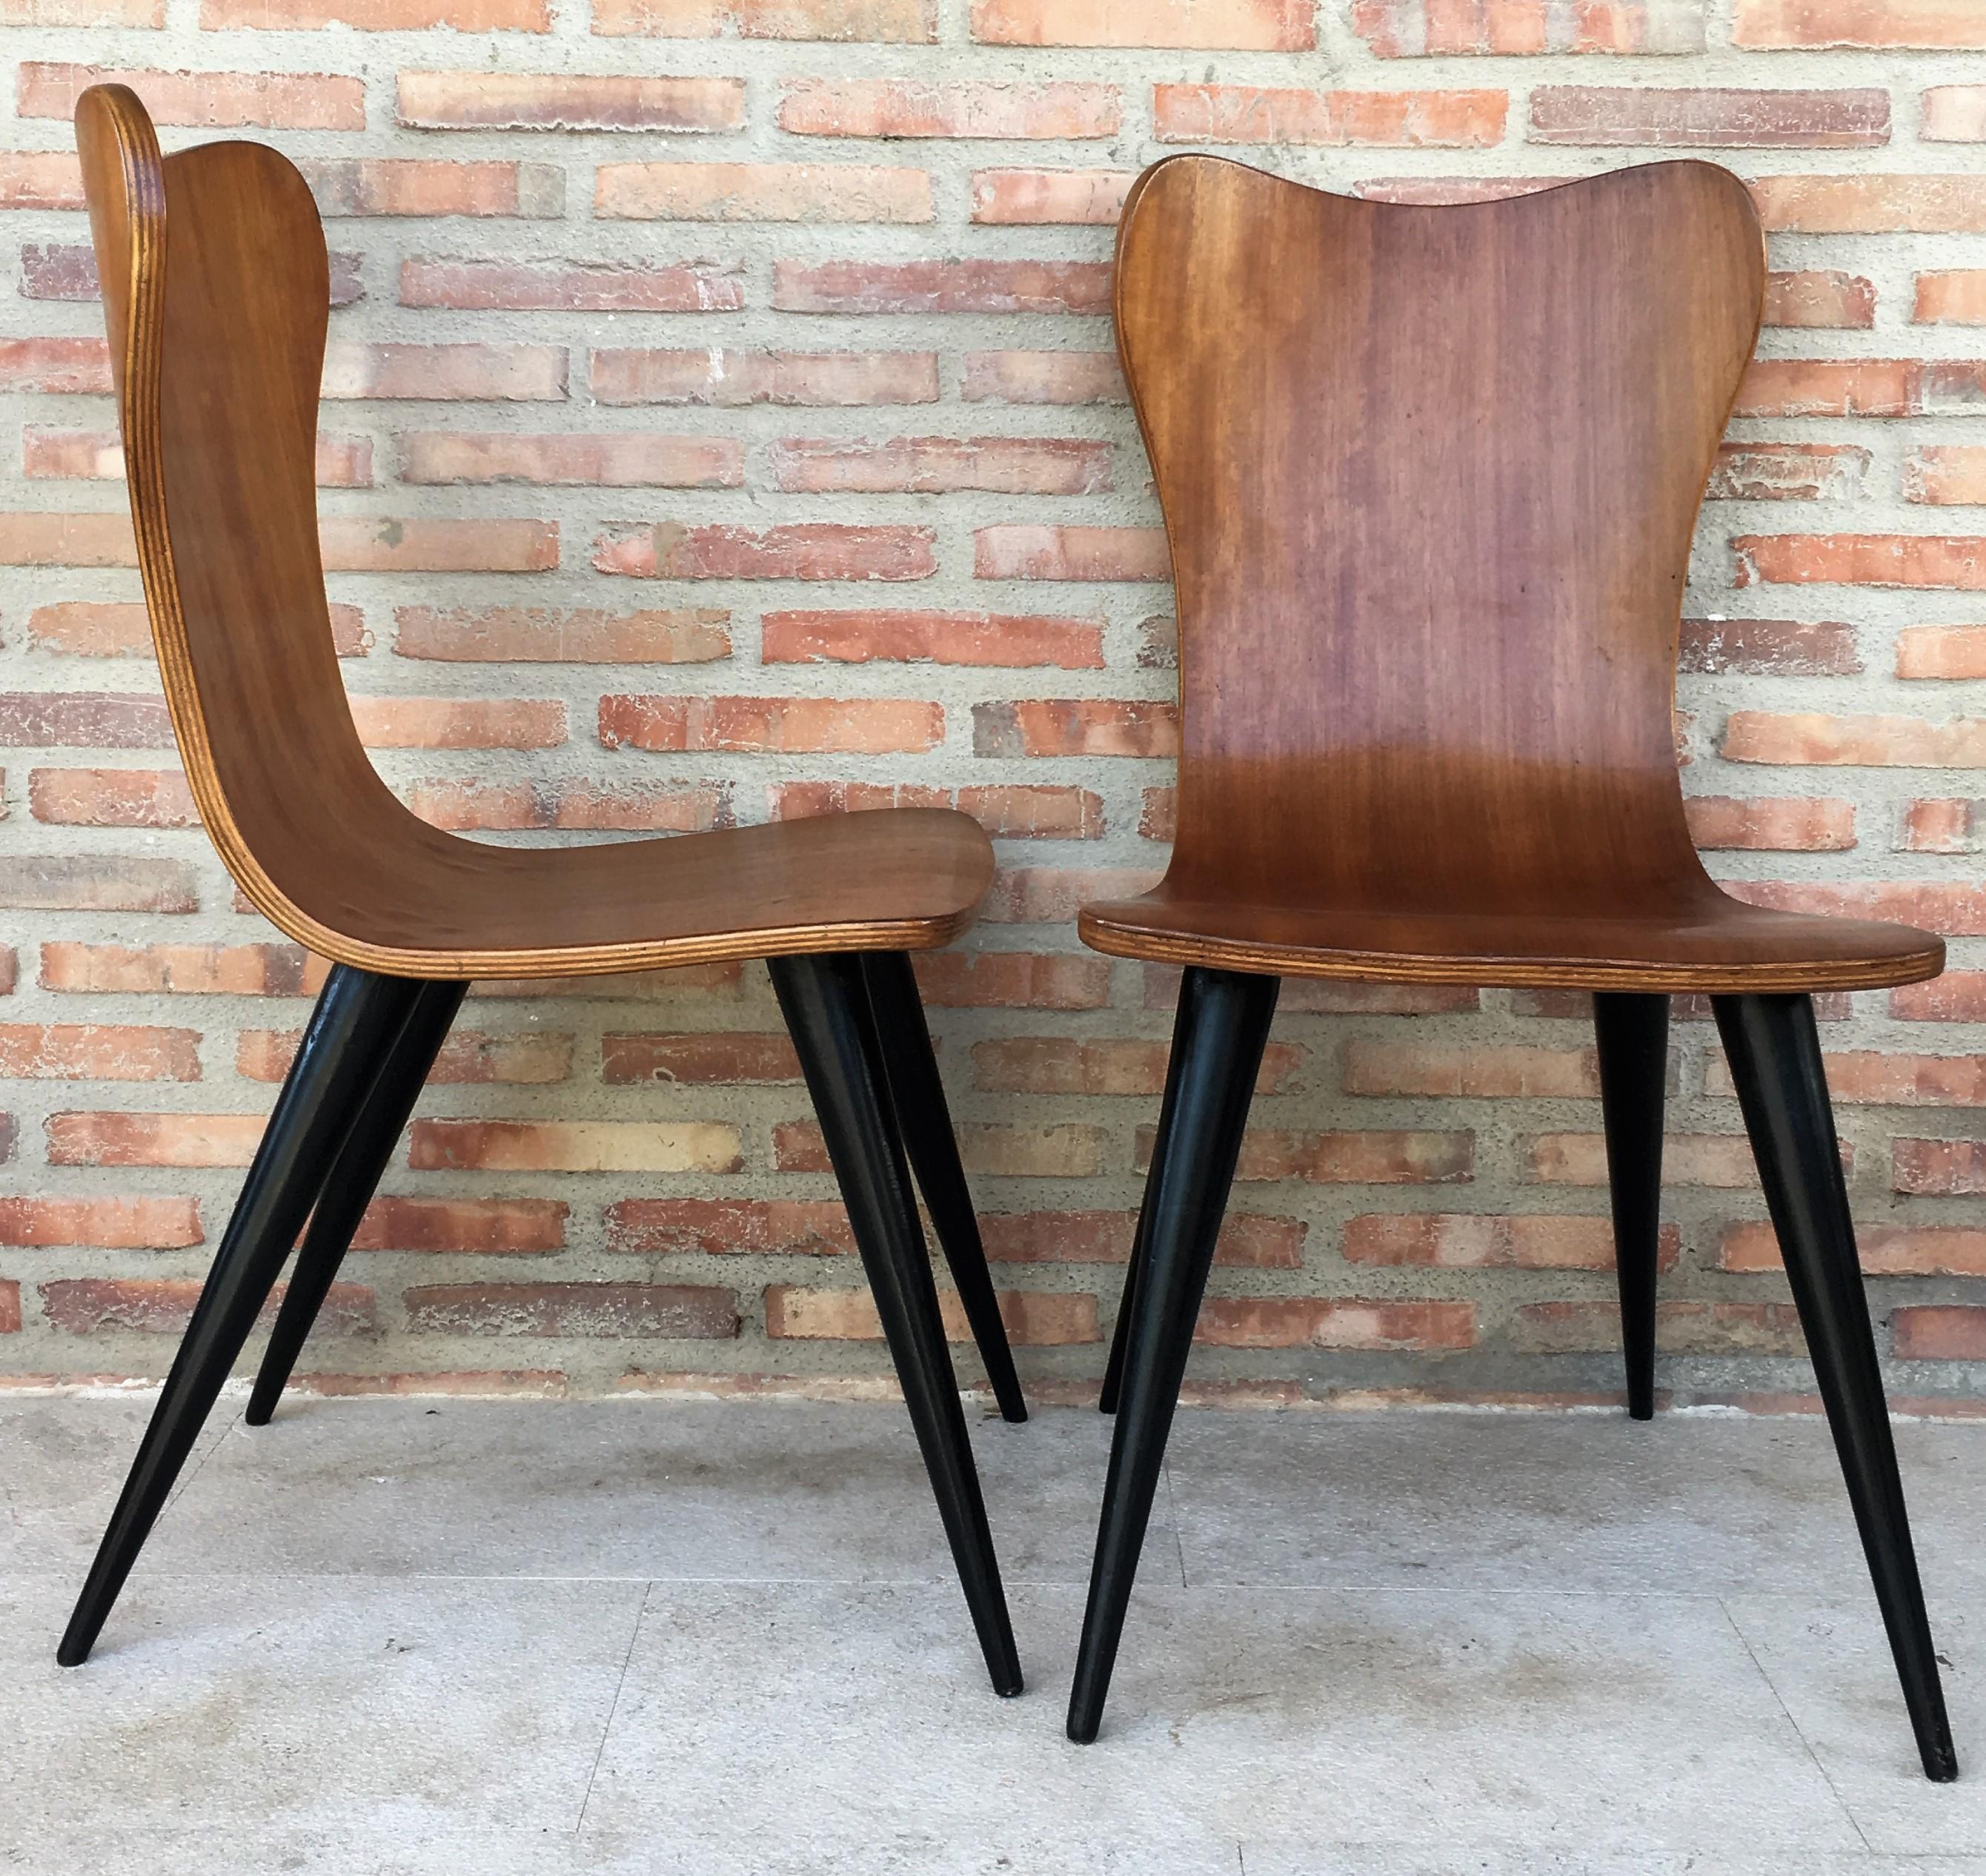 Pair of Midcentury Arne Jacobsen Style Chairs with Black Tapered Legs In Excellent Condition For Sale In Miami, FL